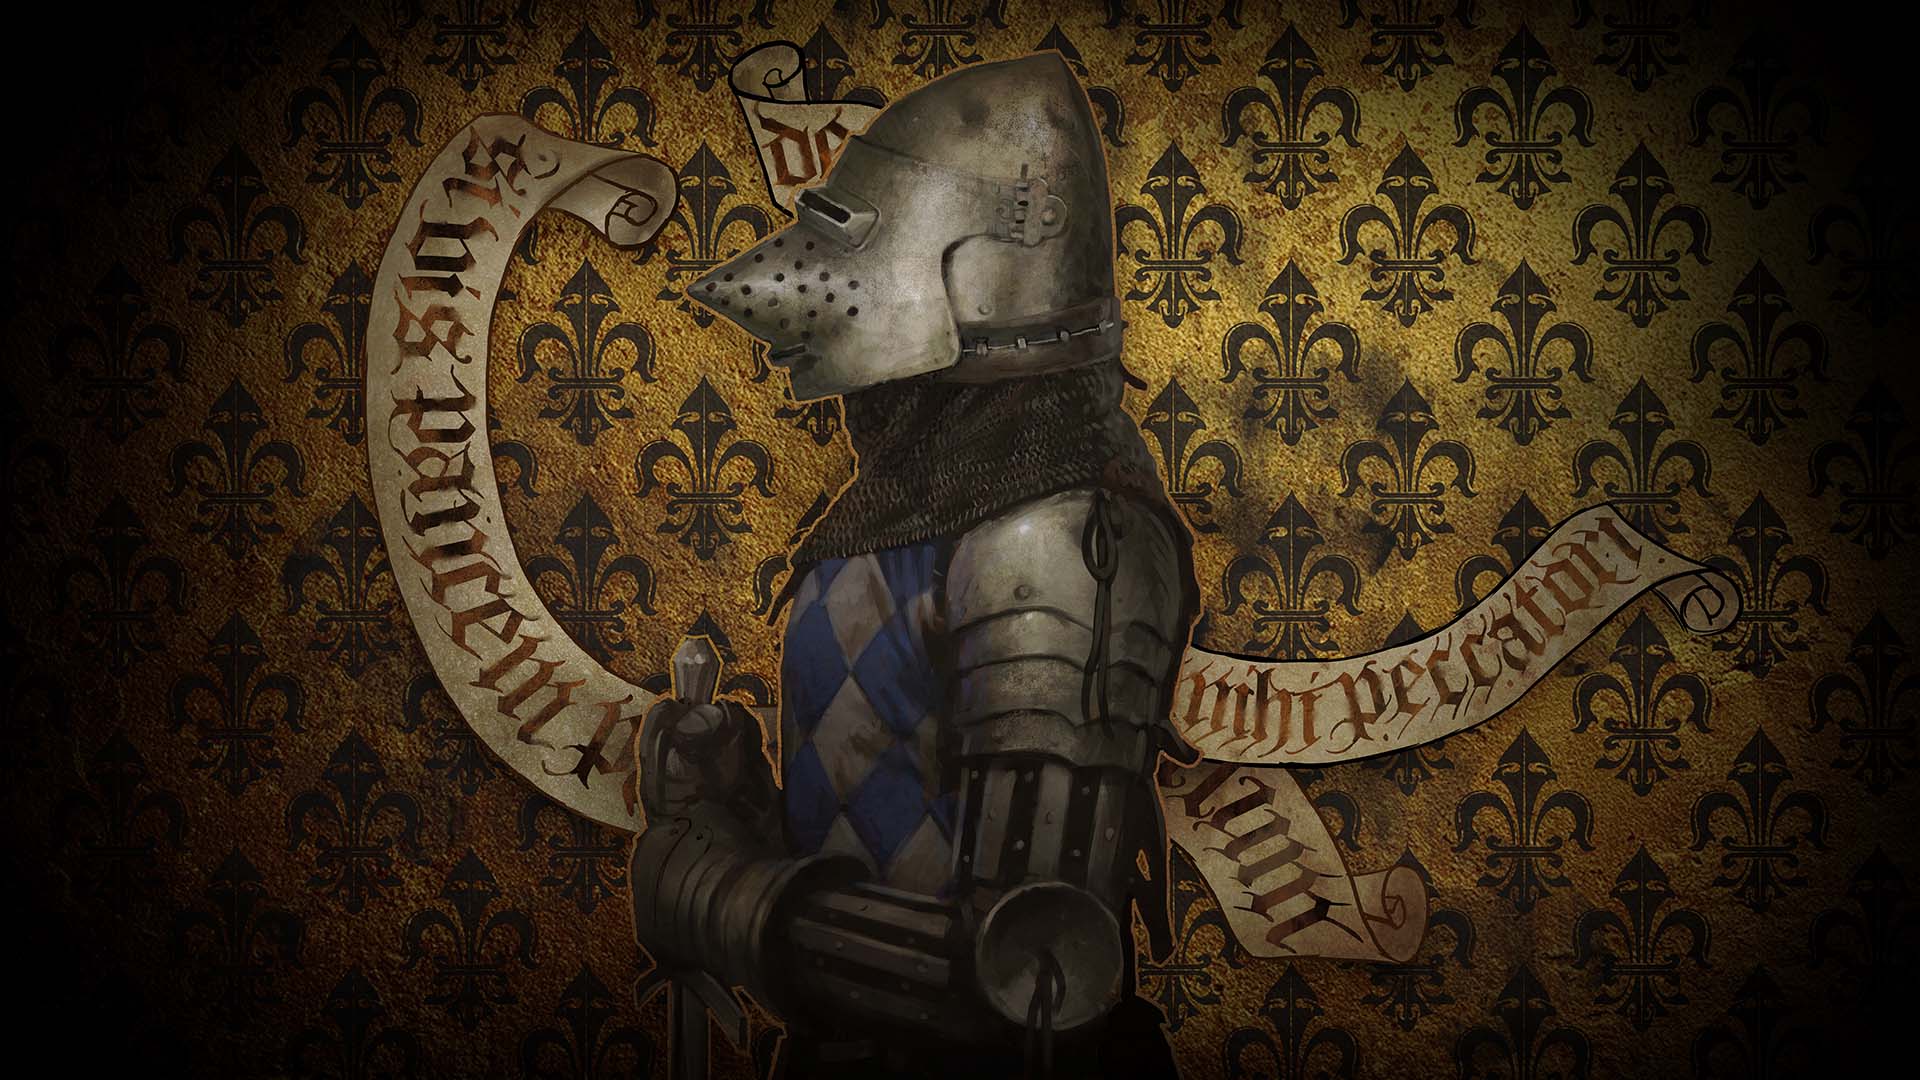 Sir Ulrich of Passau. Wallpaper from Kingdom Come: Deliverance